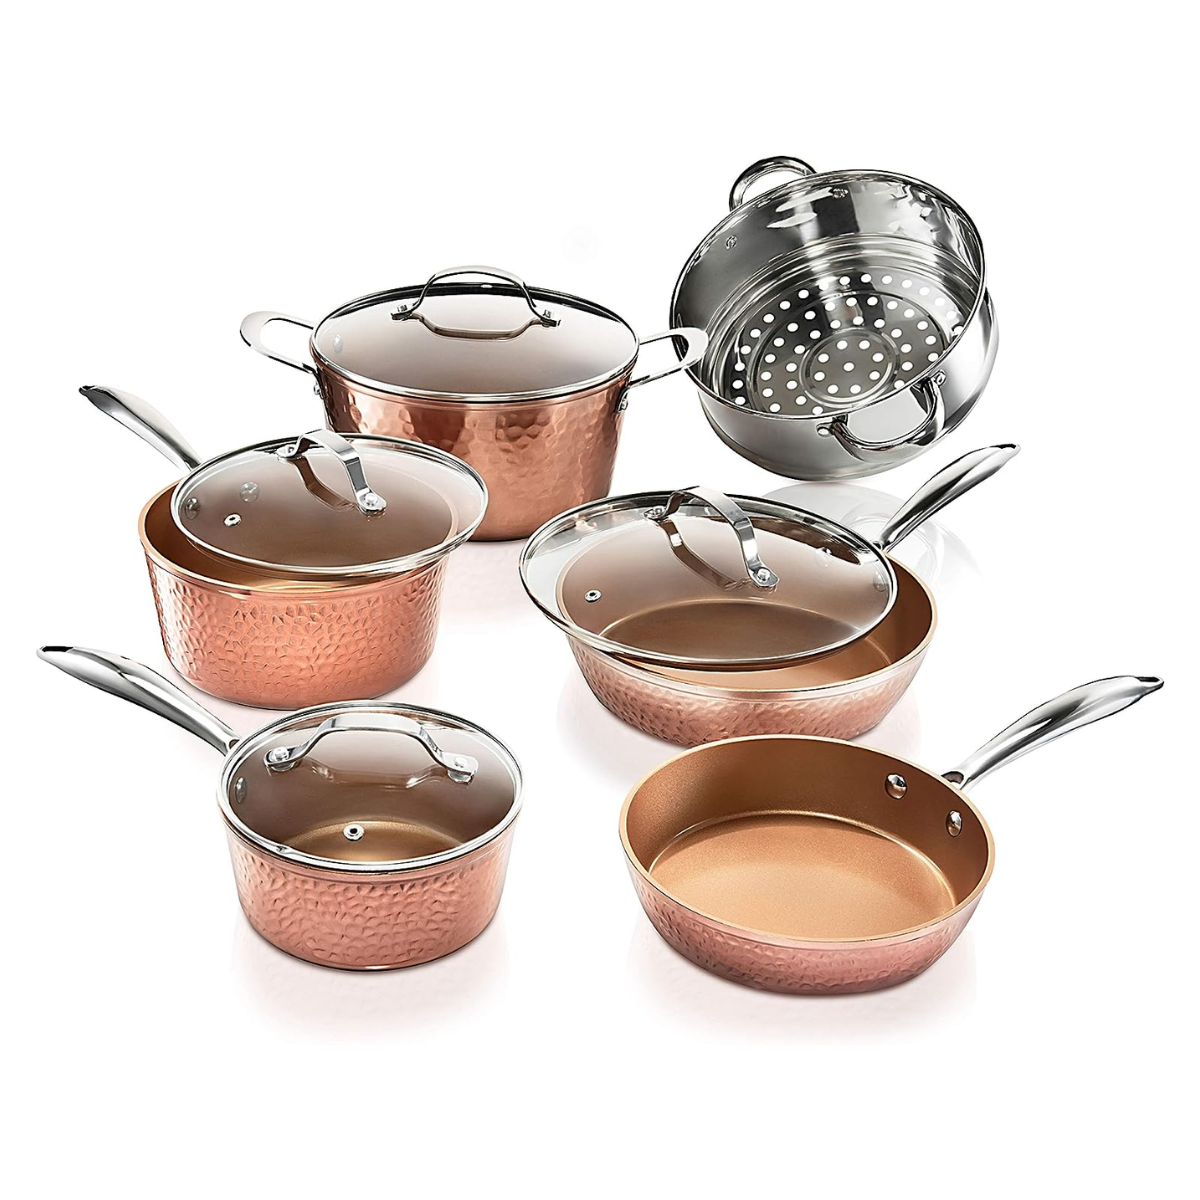 4. Celebrate 7 Years of Love with a Stunning Copper Cookware Set